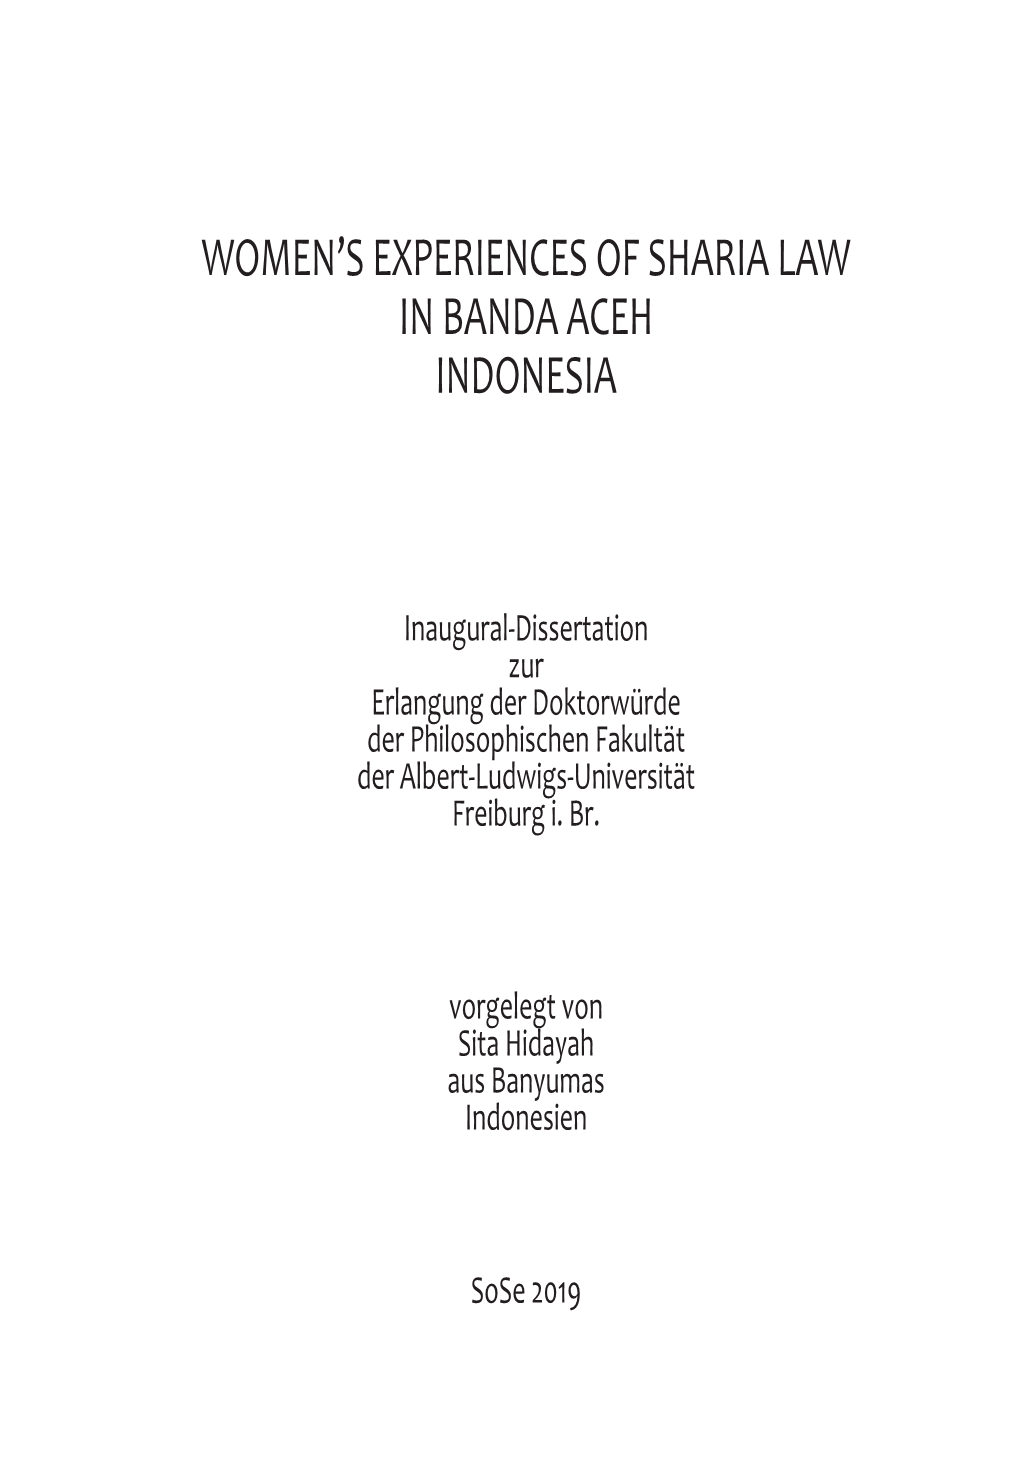 Women's Experiences of Sharia Law in Banda Aceh